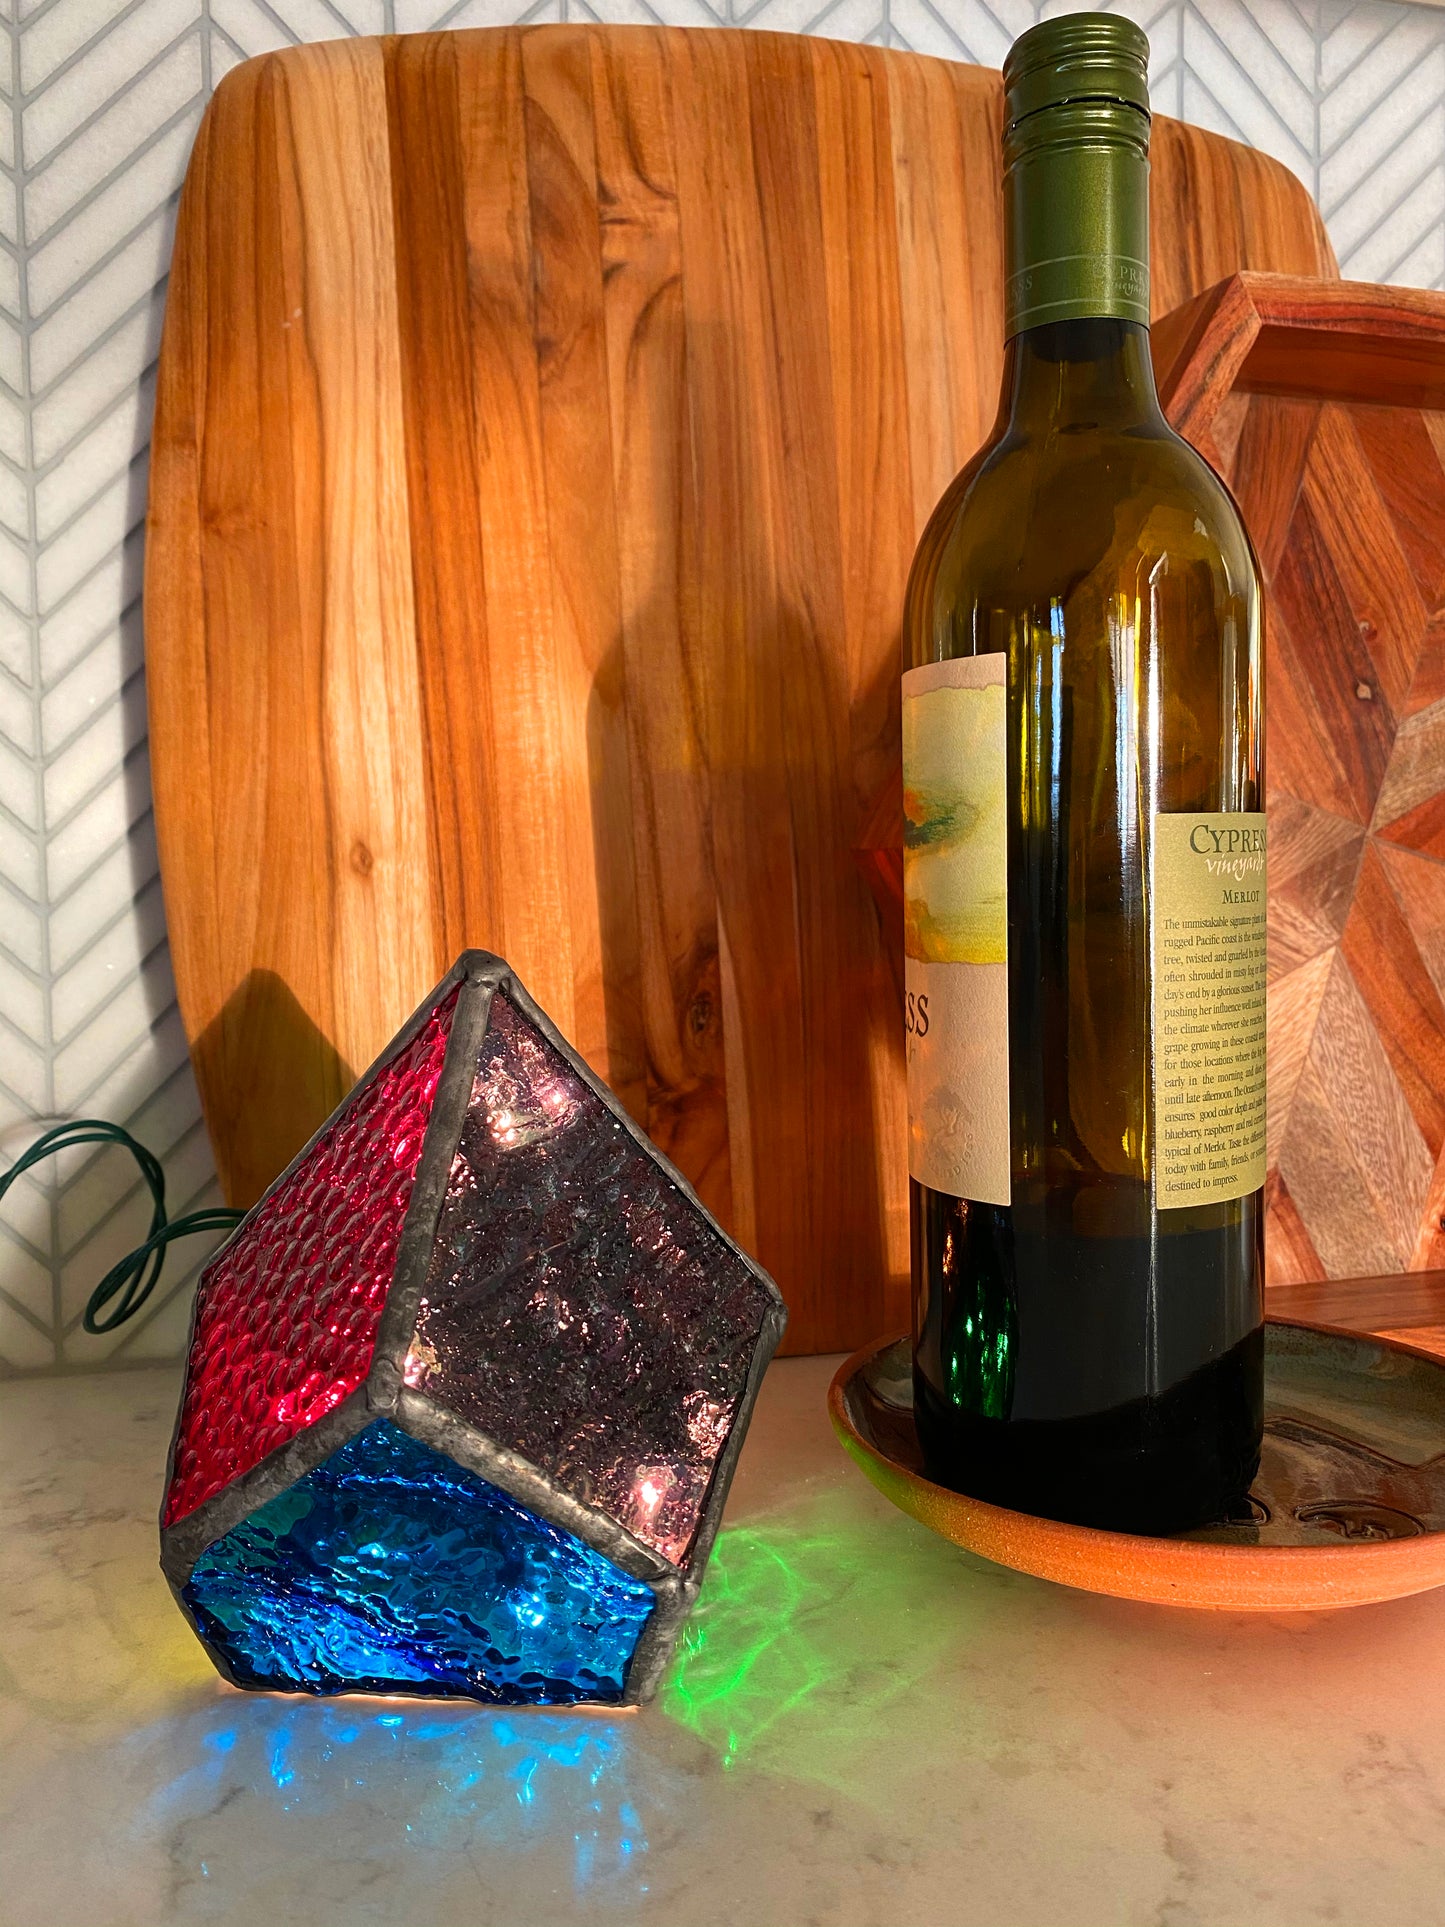 Lighted Gem: Stained Glass Small Geometric Prism Lamp